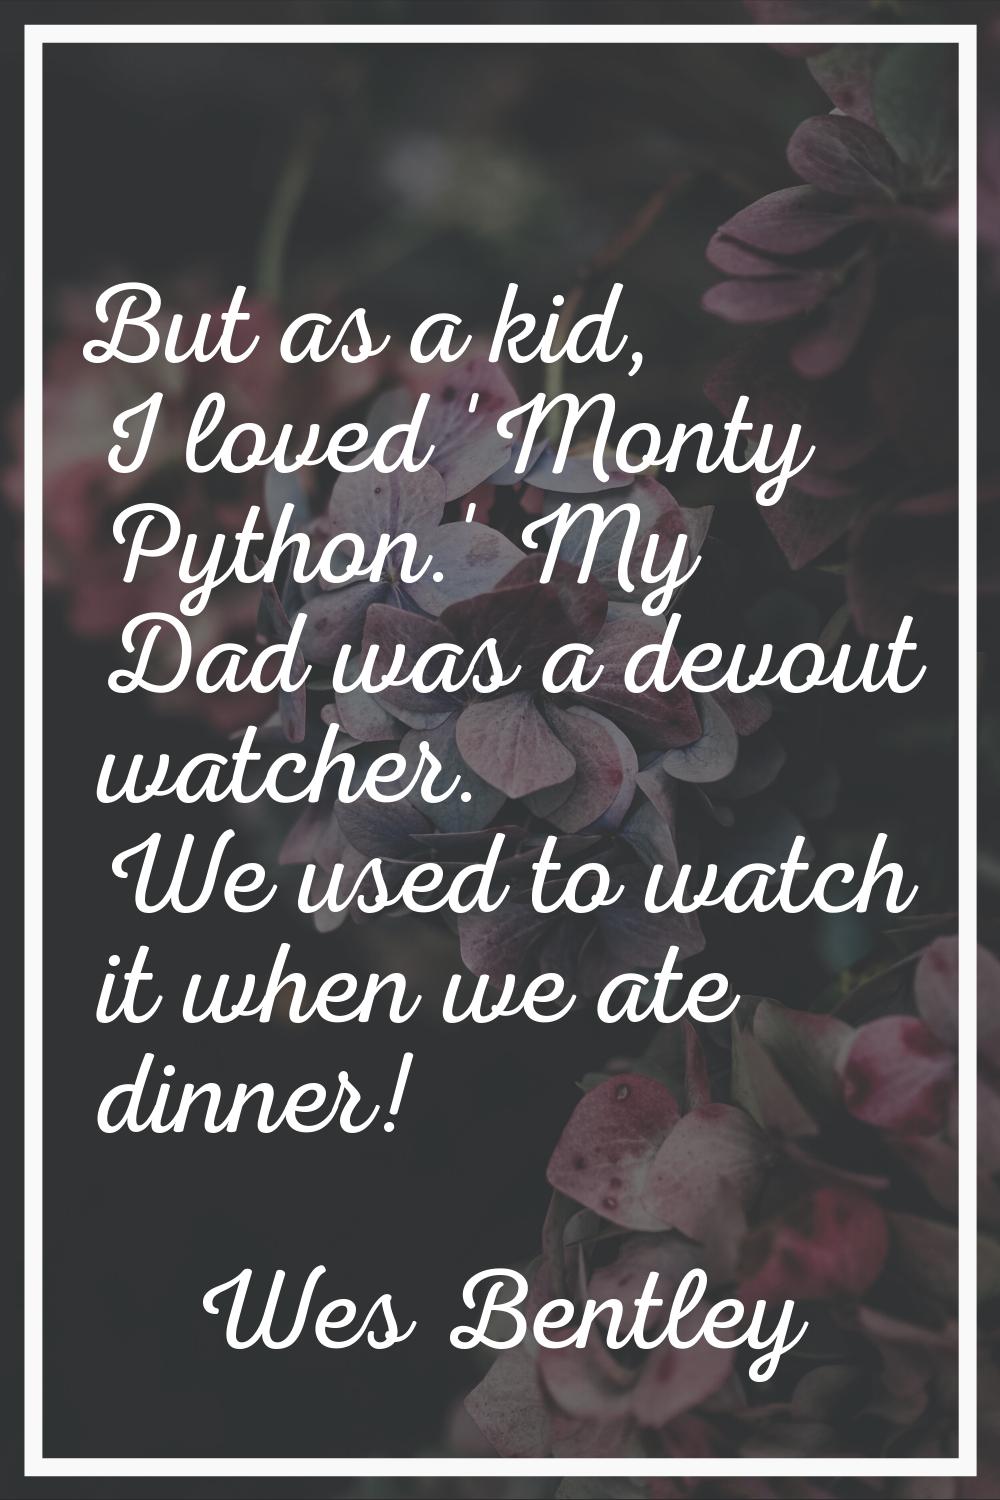 But as a kid, I loved 'Monty Python.' My Dad was a devout watcher. We used to watch it when we ate 